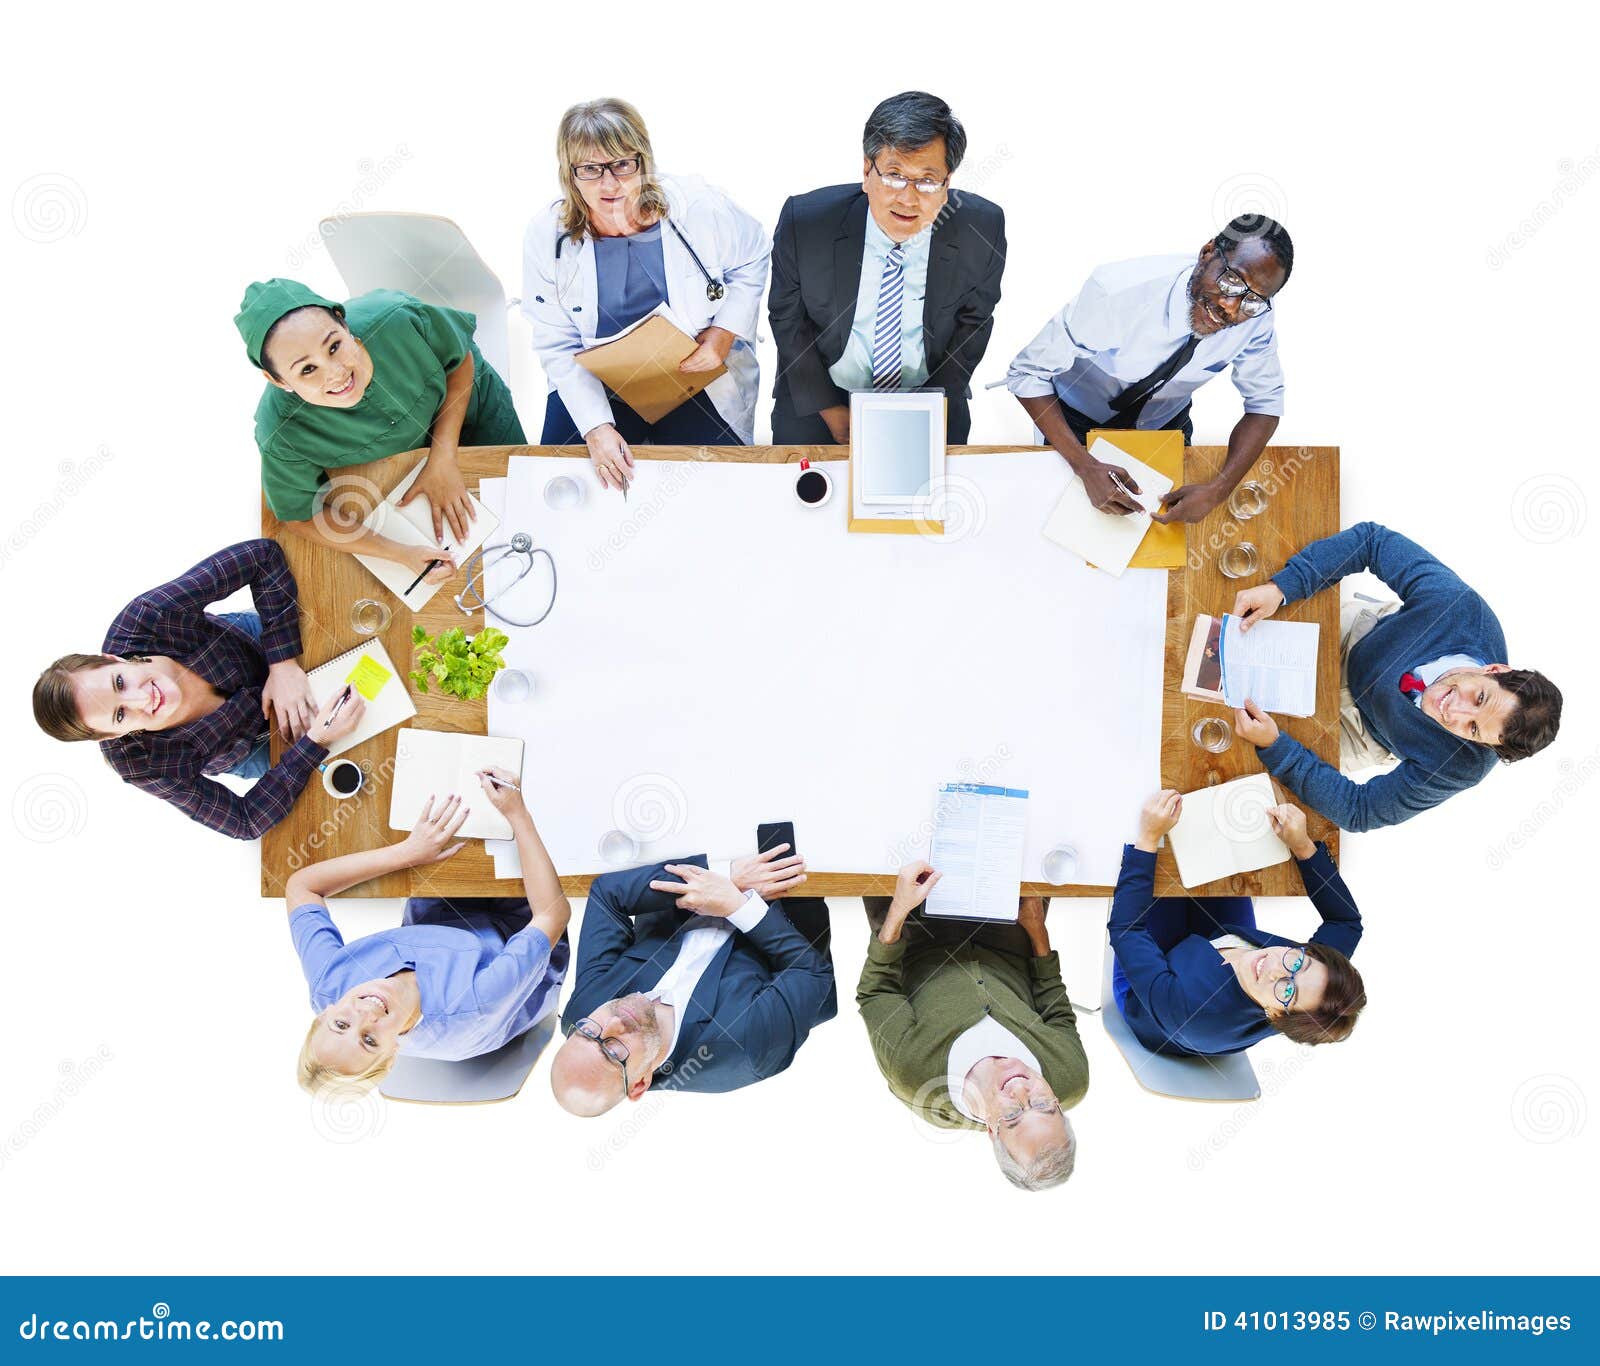 group of people with various occupations in a meeting